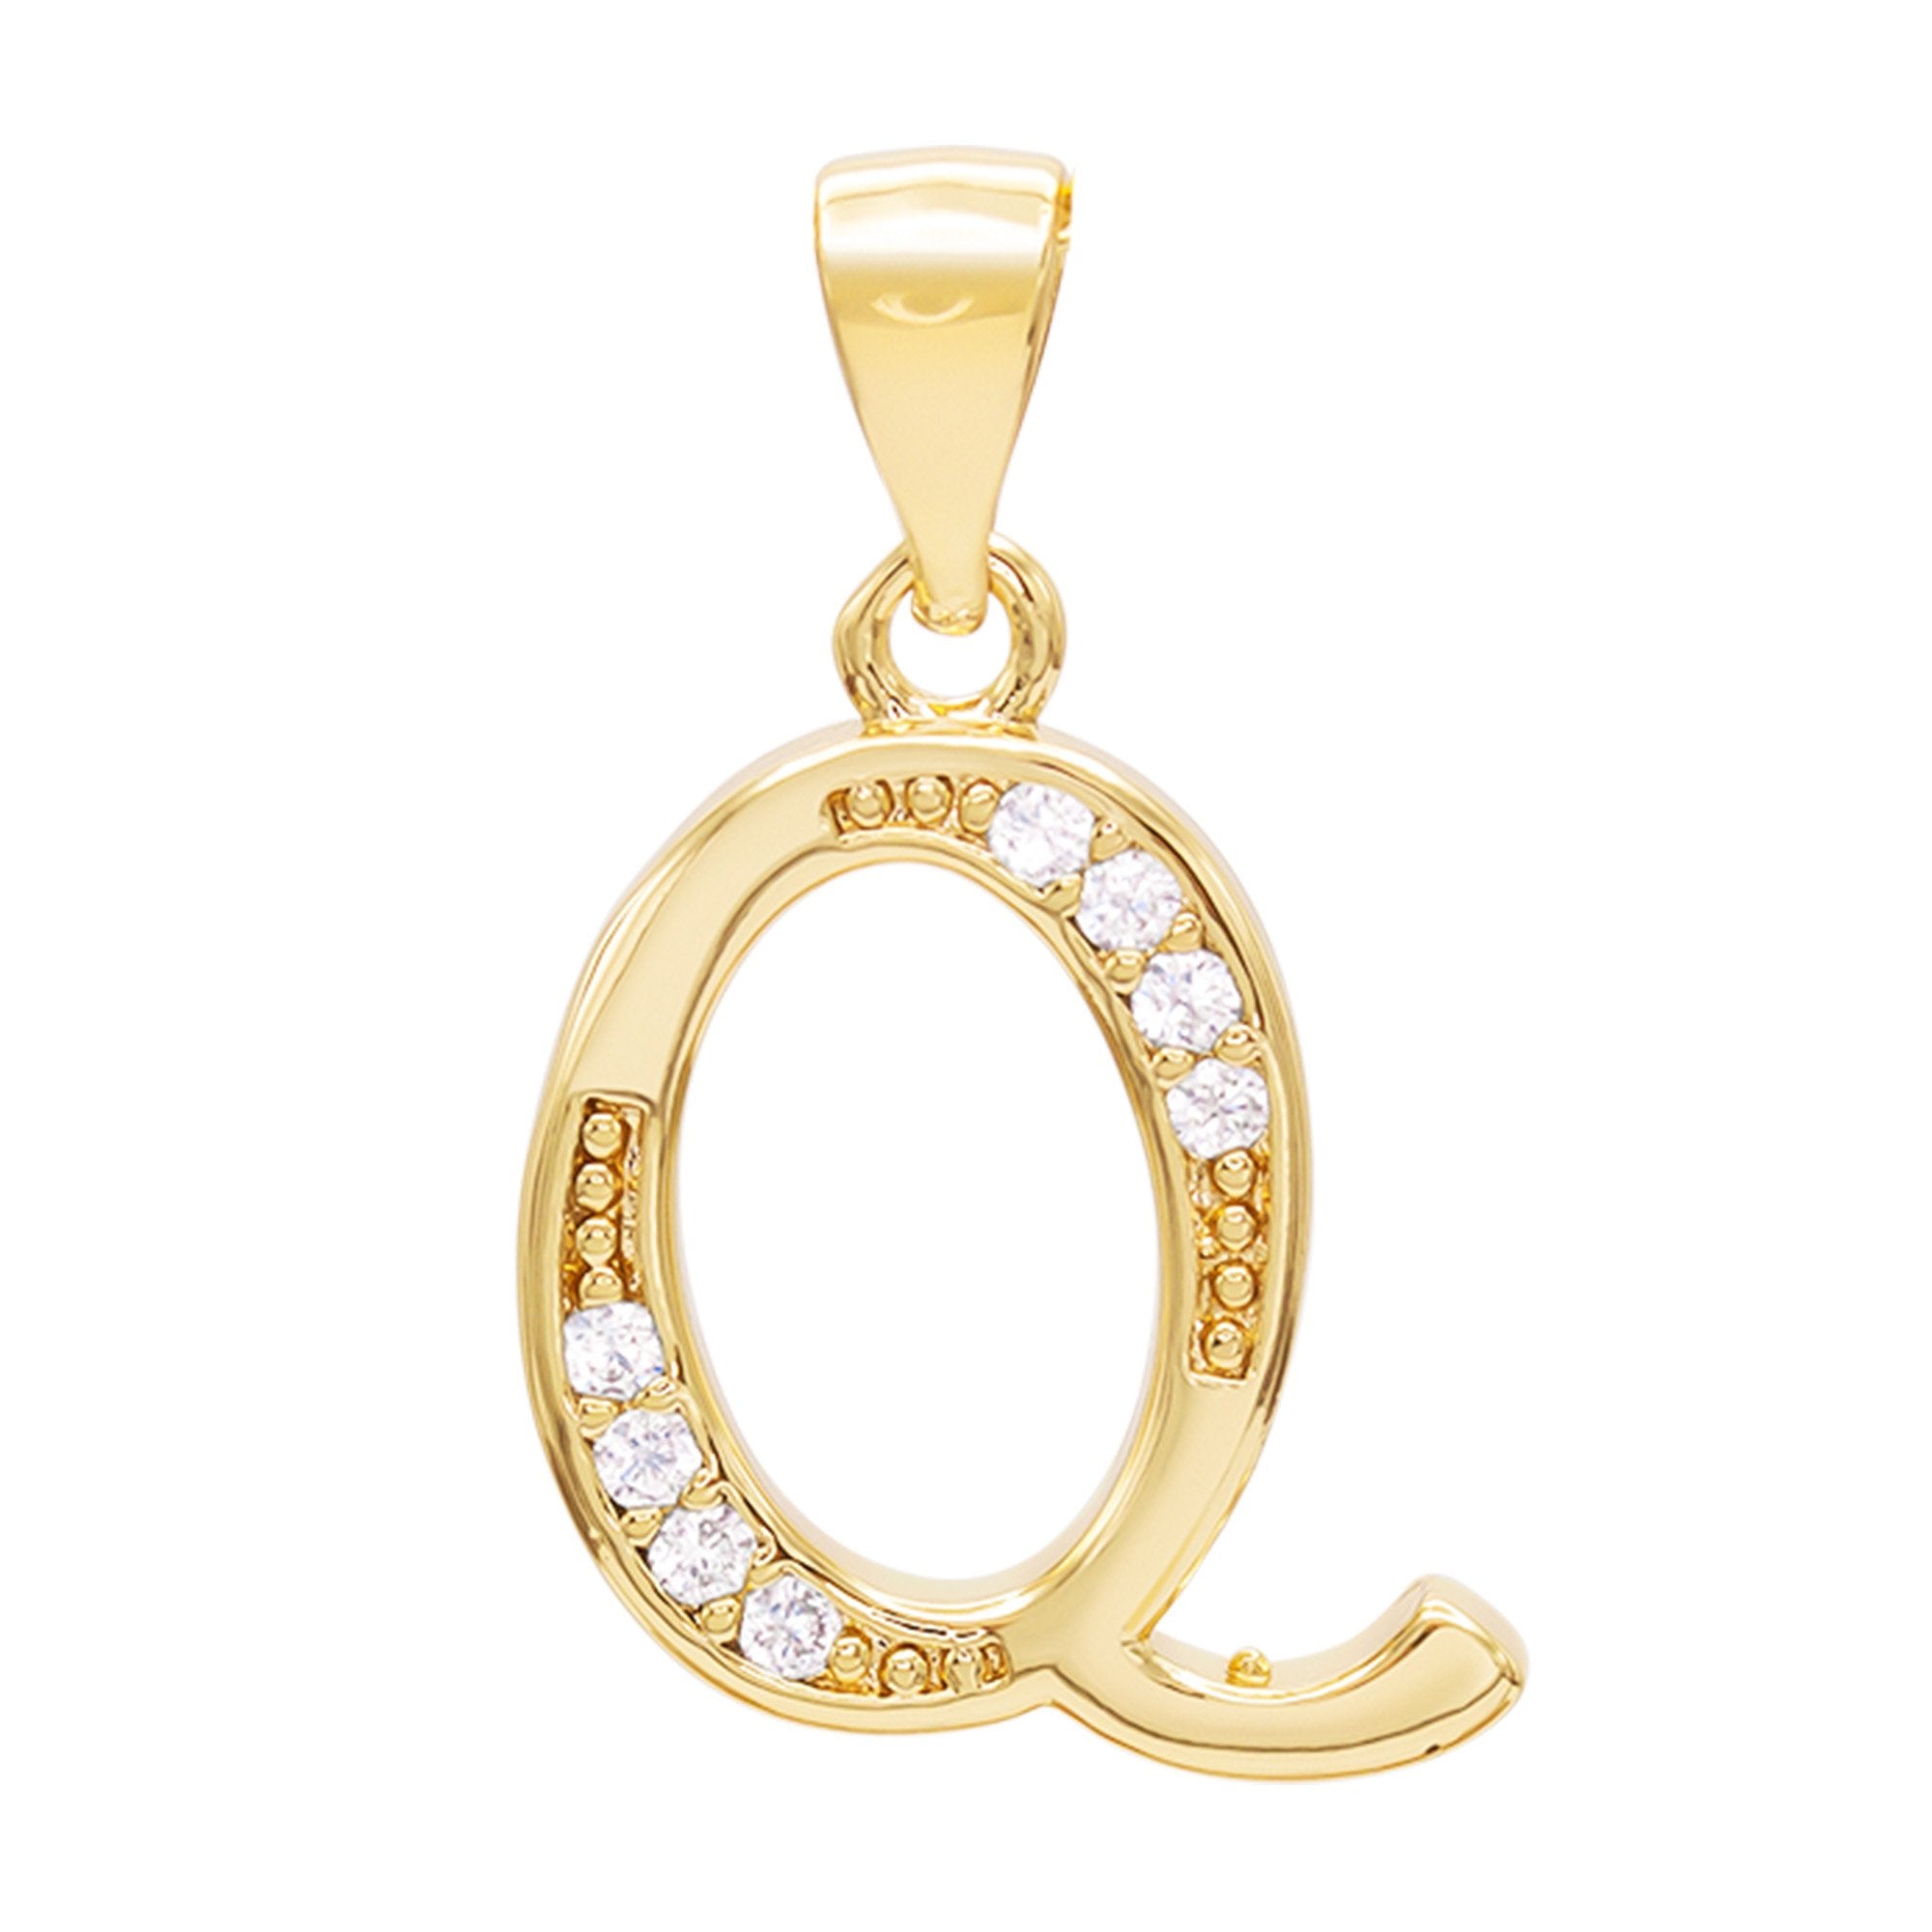 High Quality Women Initial Letter Necklace Gold Charm Pendant